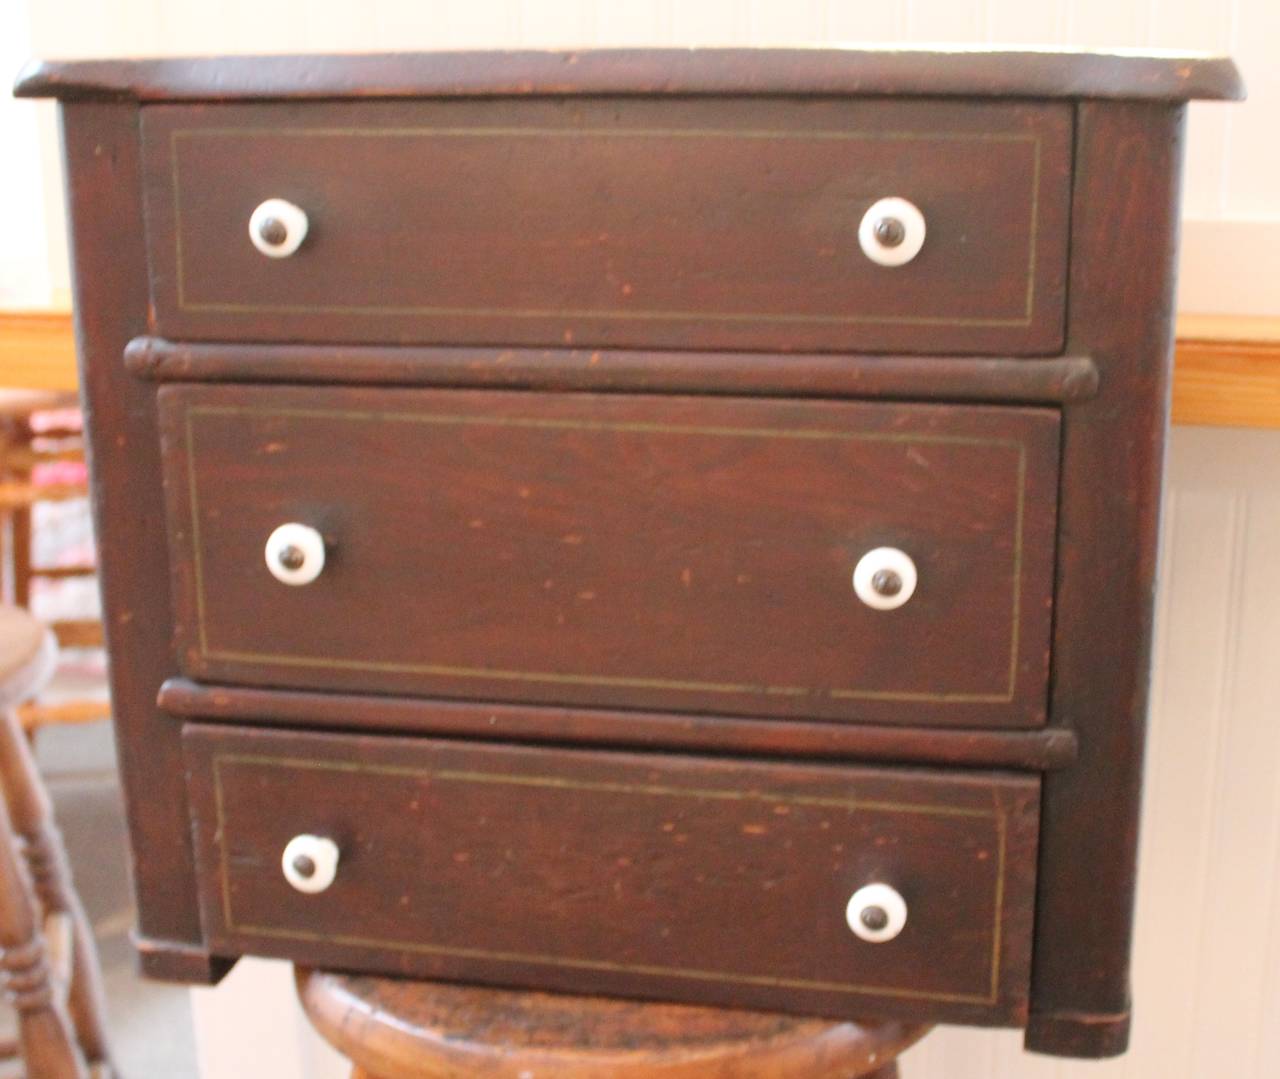 19th century original stained chest of drawers with original gilded trim. The porcelain knobs or drawer pulls are also original to the miniature chest of drawers. The construction is all square cut nails. This would make a wonderful counter spice